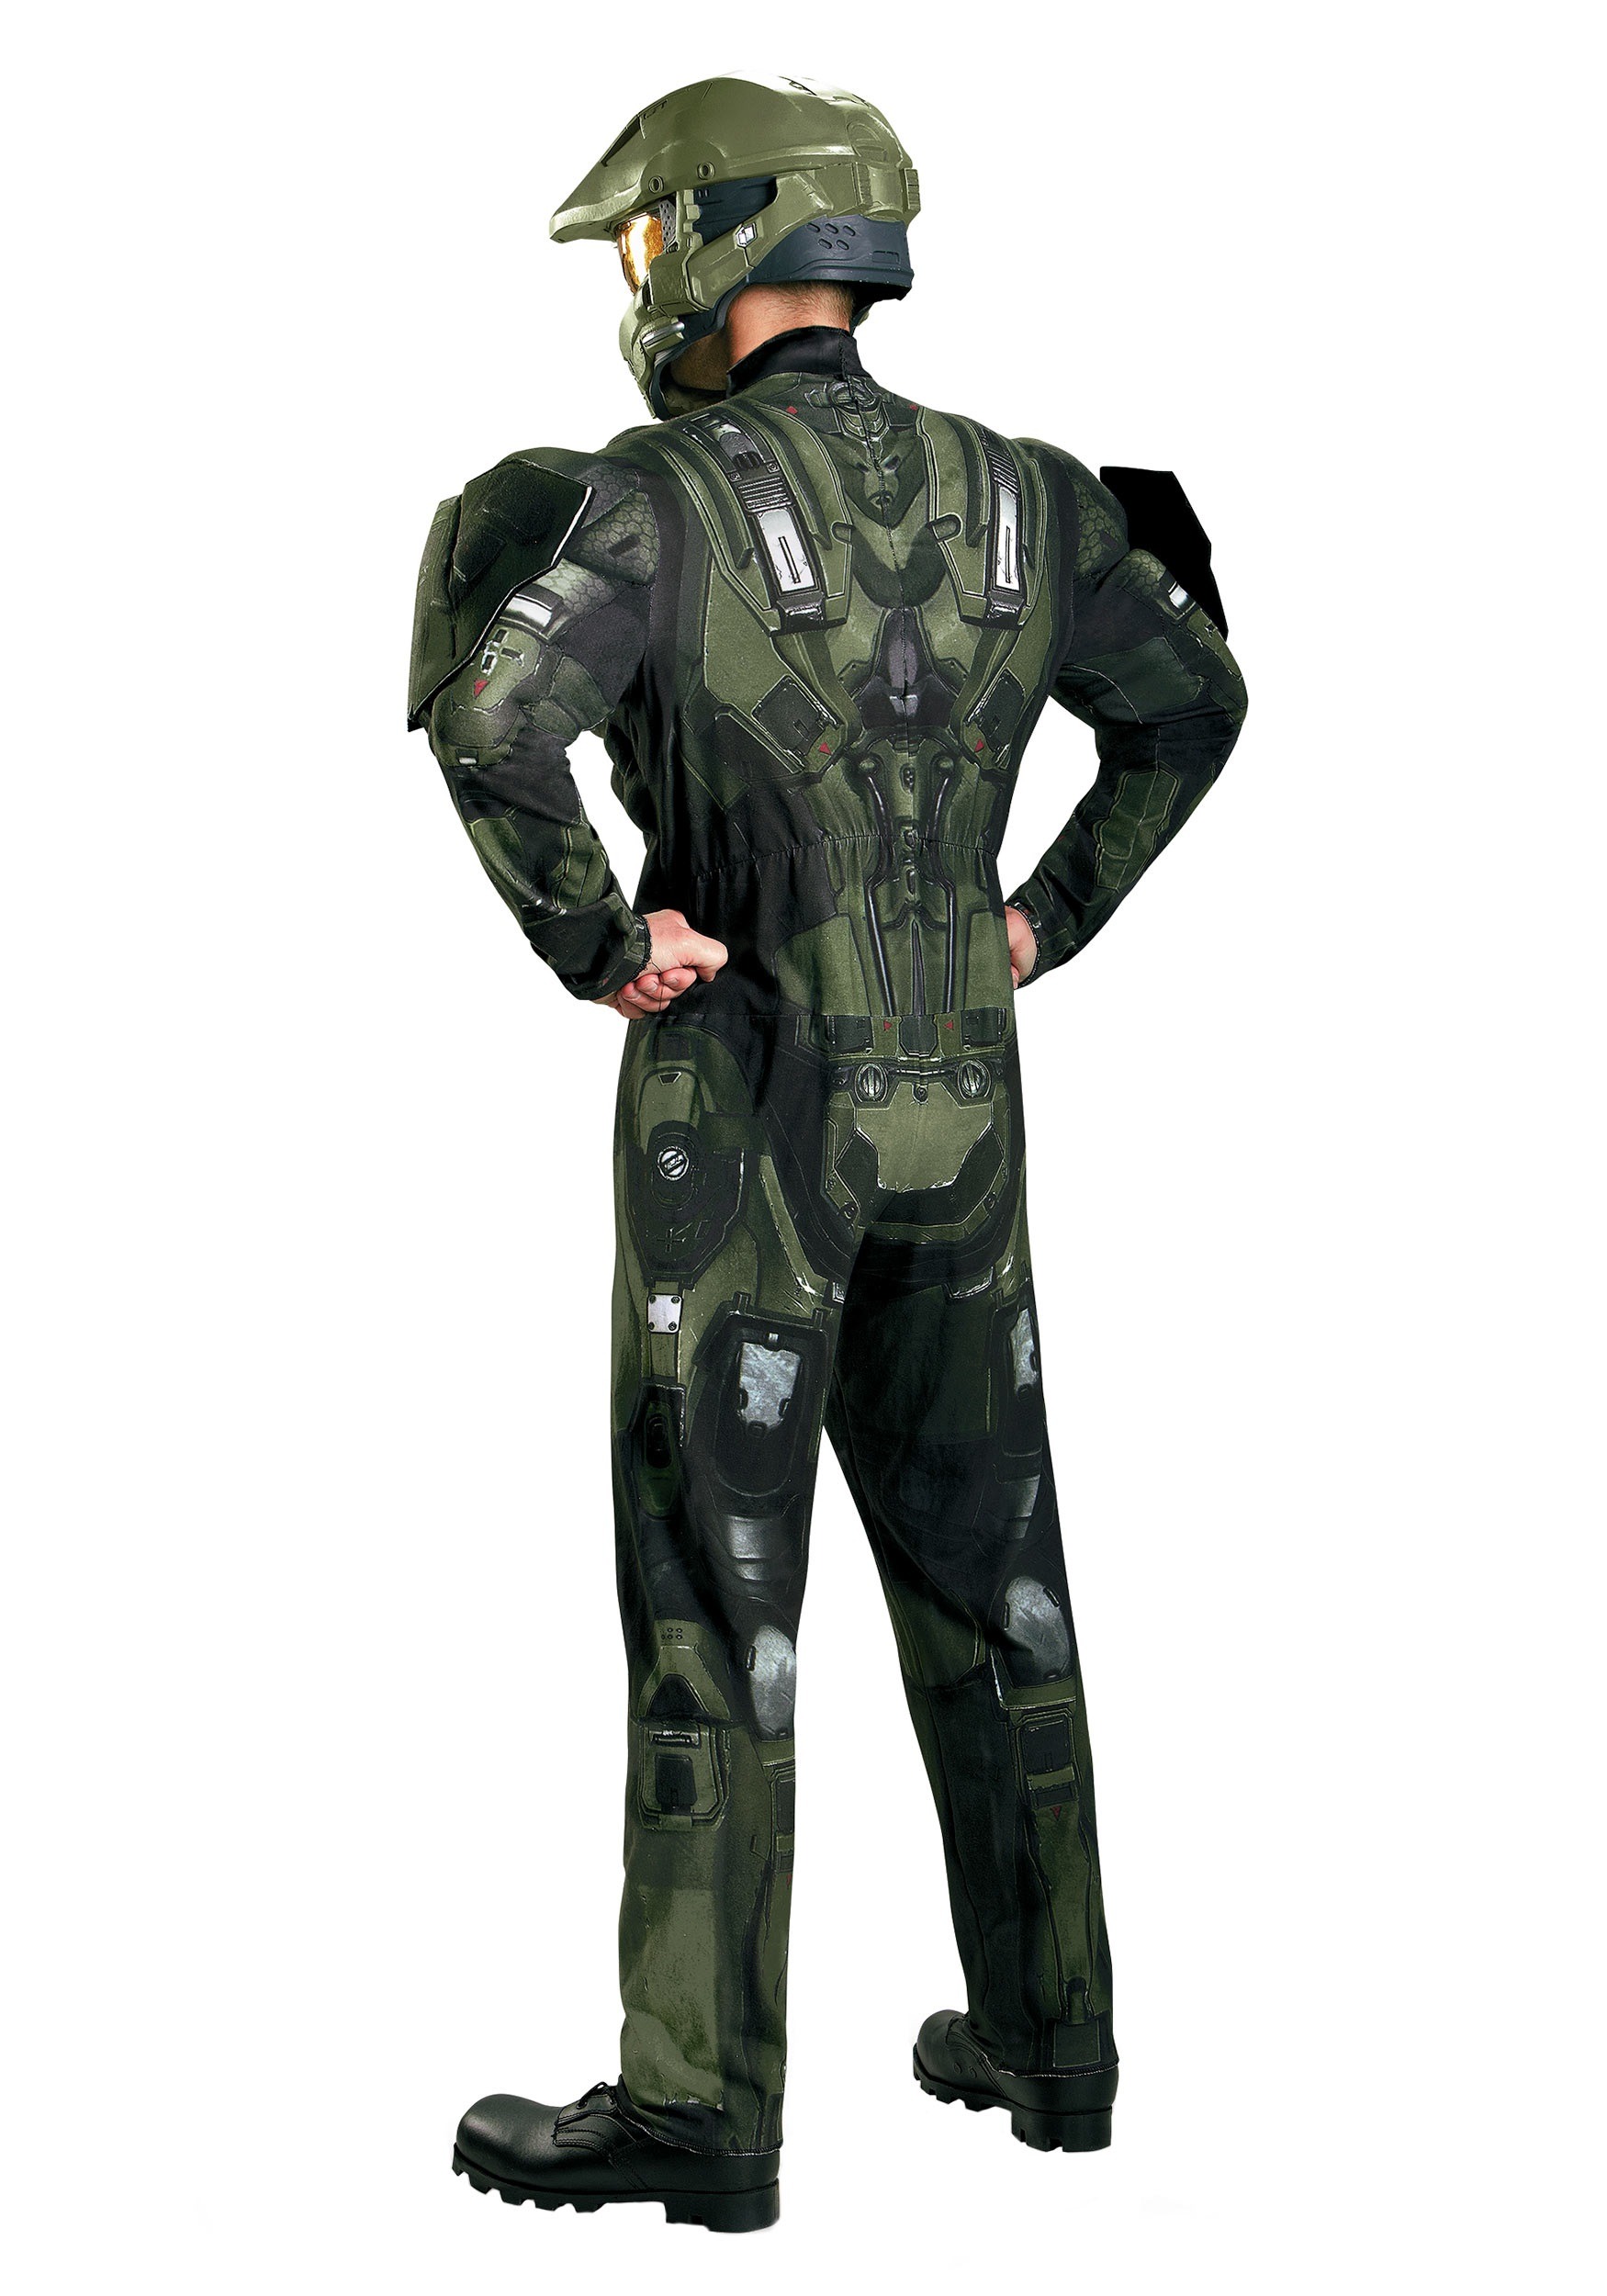 Adult Deluxe Muscle Master Chief Costume